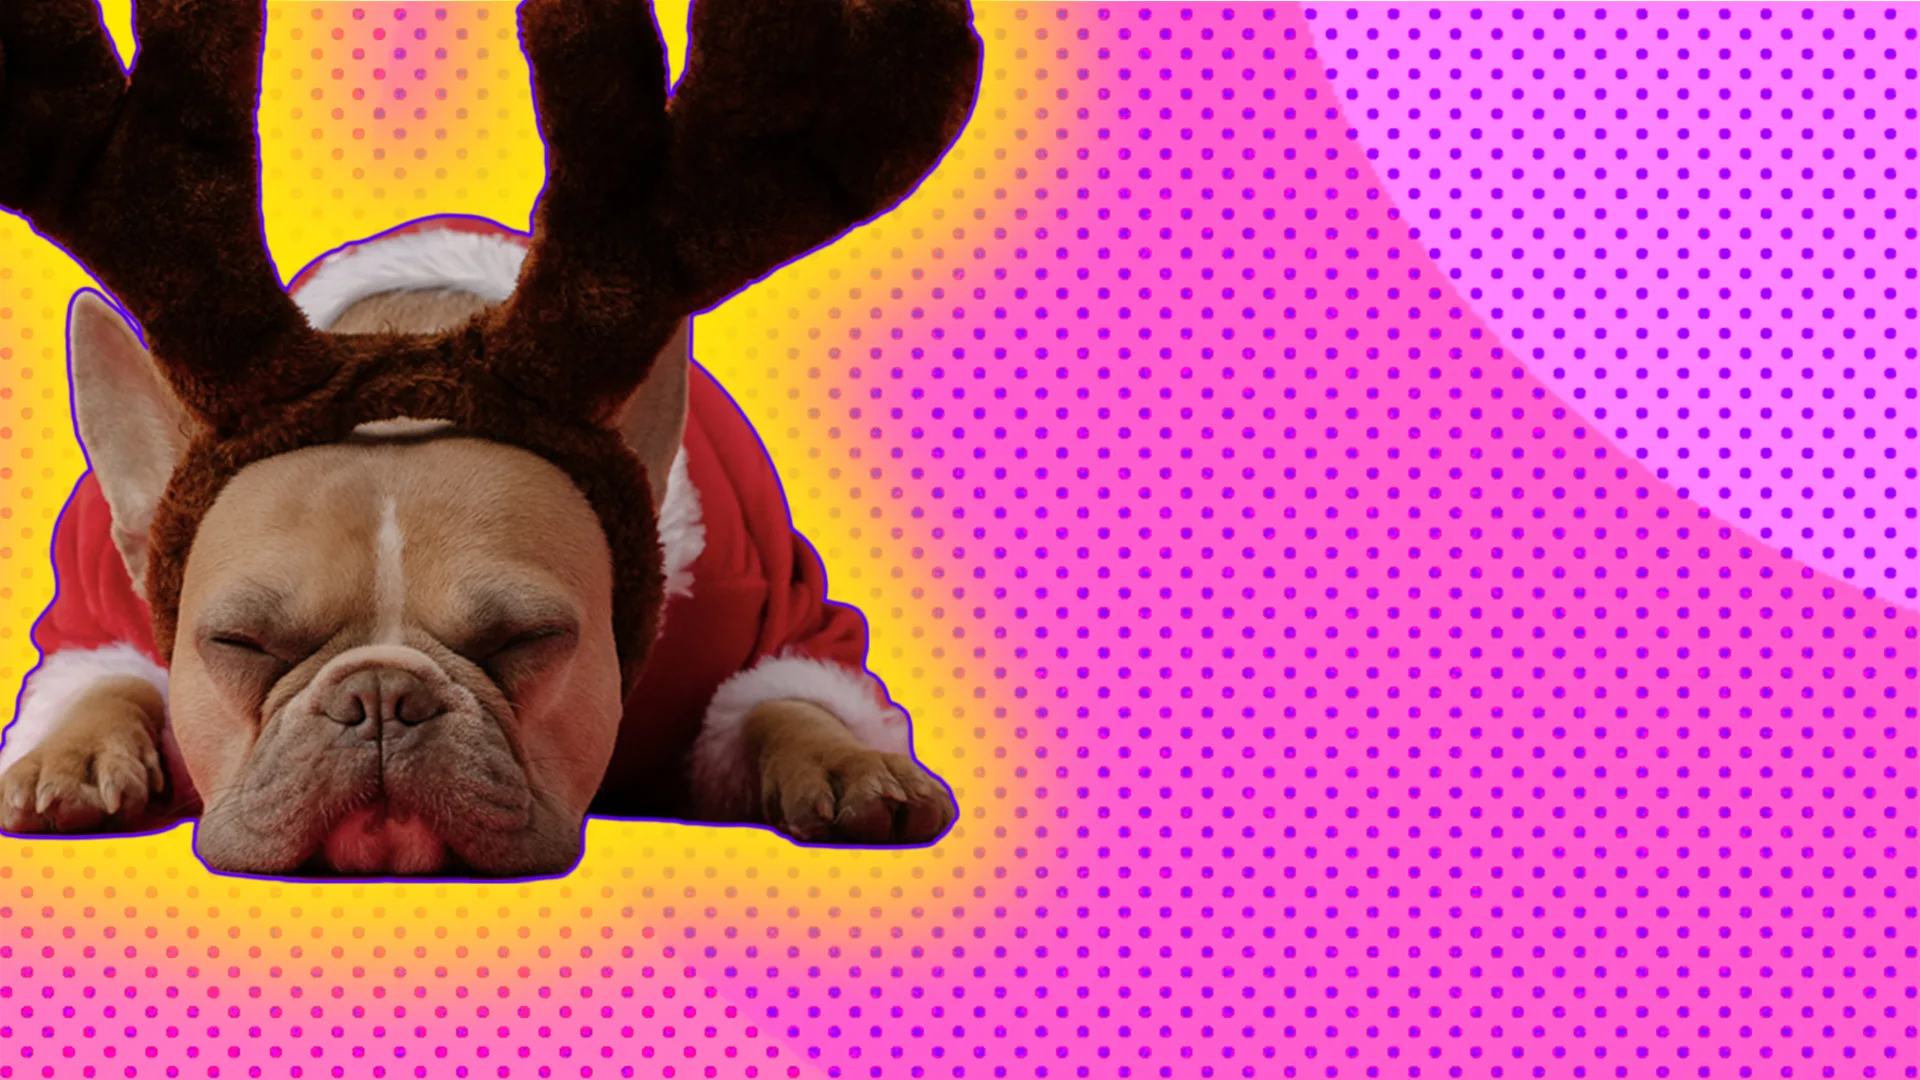 Sleeping French Bulldog wearing reindeer antlers head band and red and white Christmas outfit on pink-dotted background.